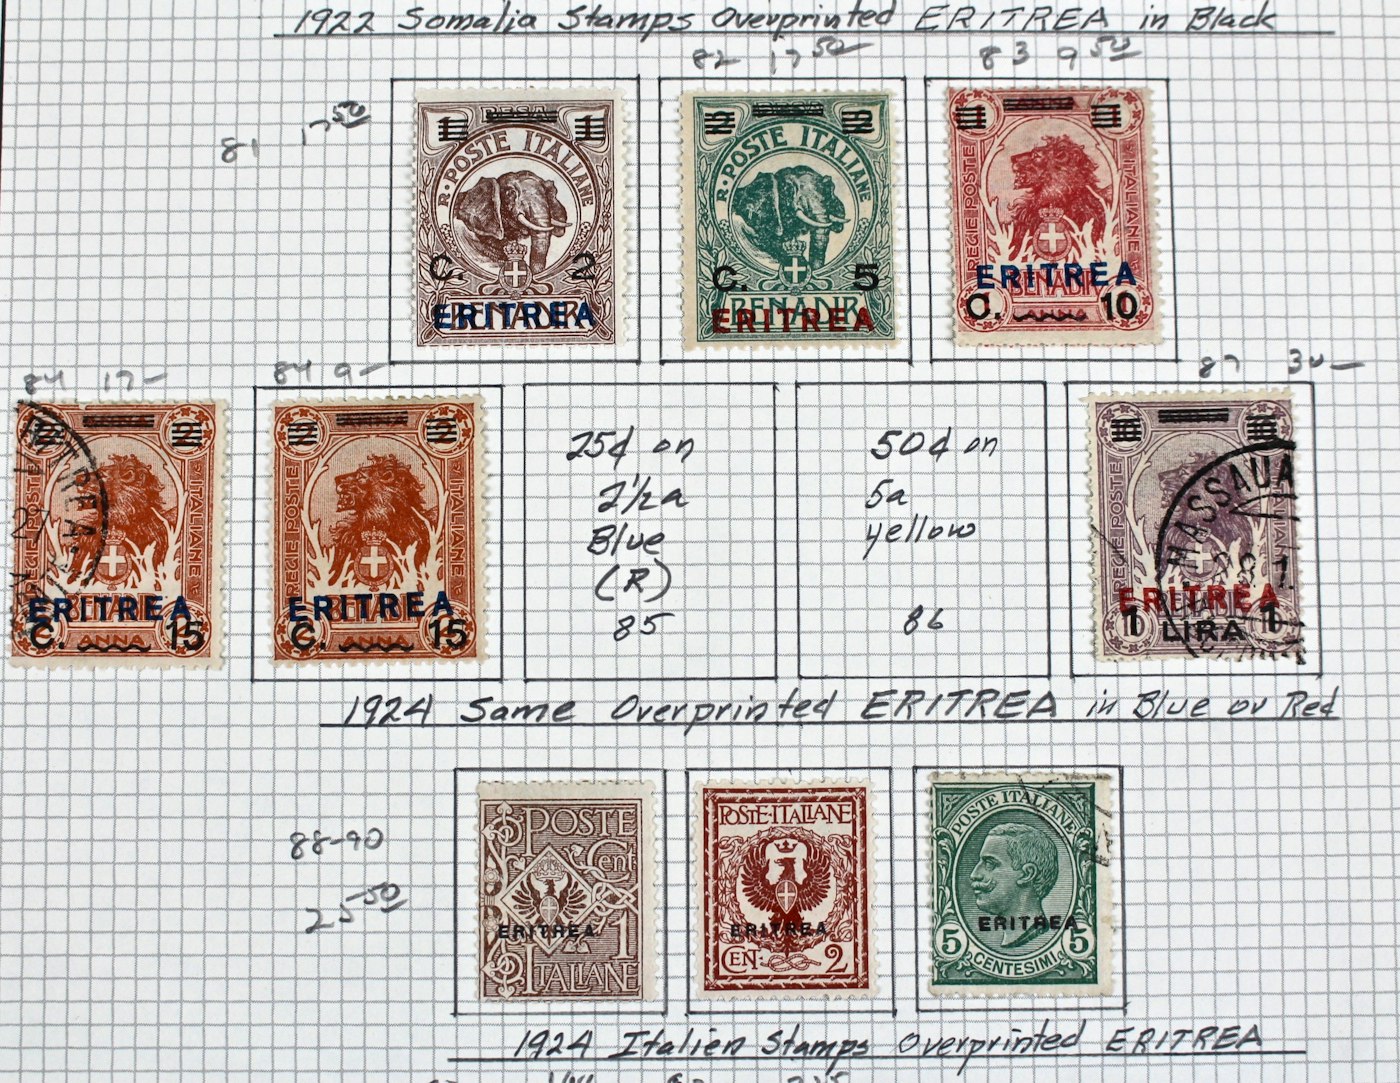 Twelve Stamp  Album Pages of Postage Stamps  From Eritrea  